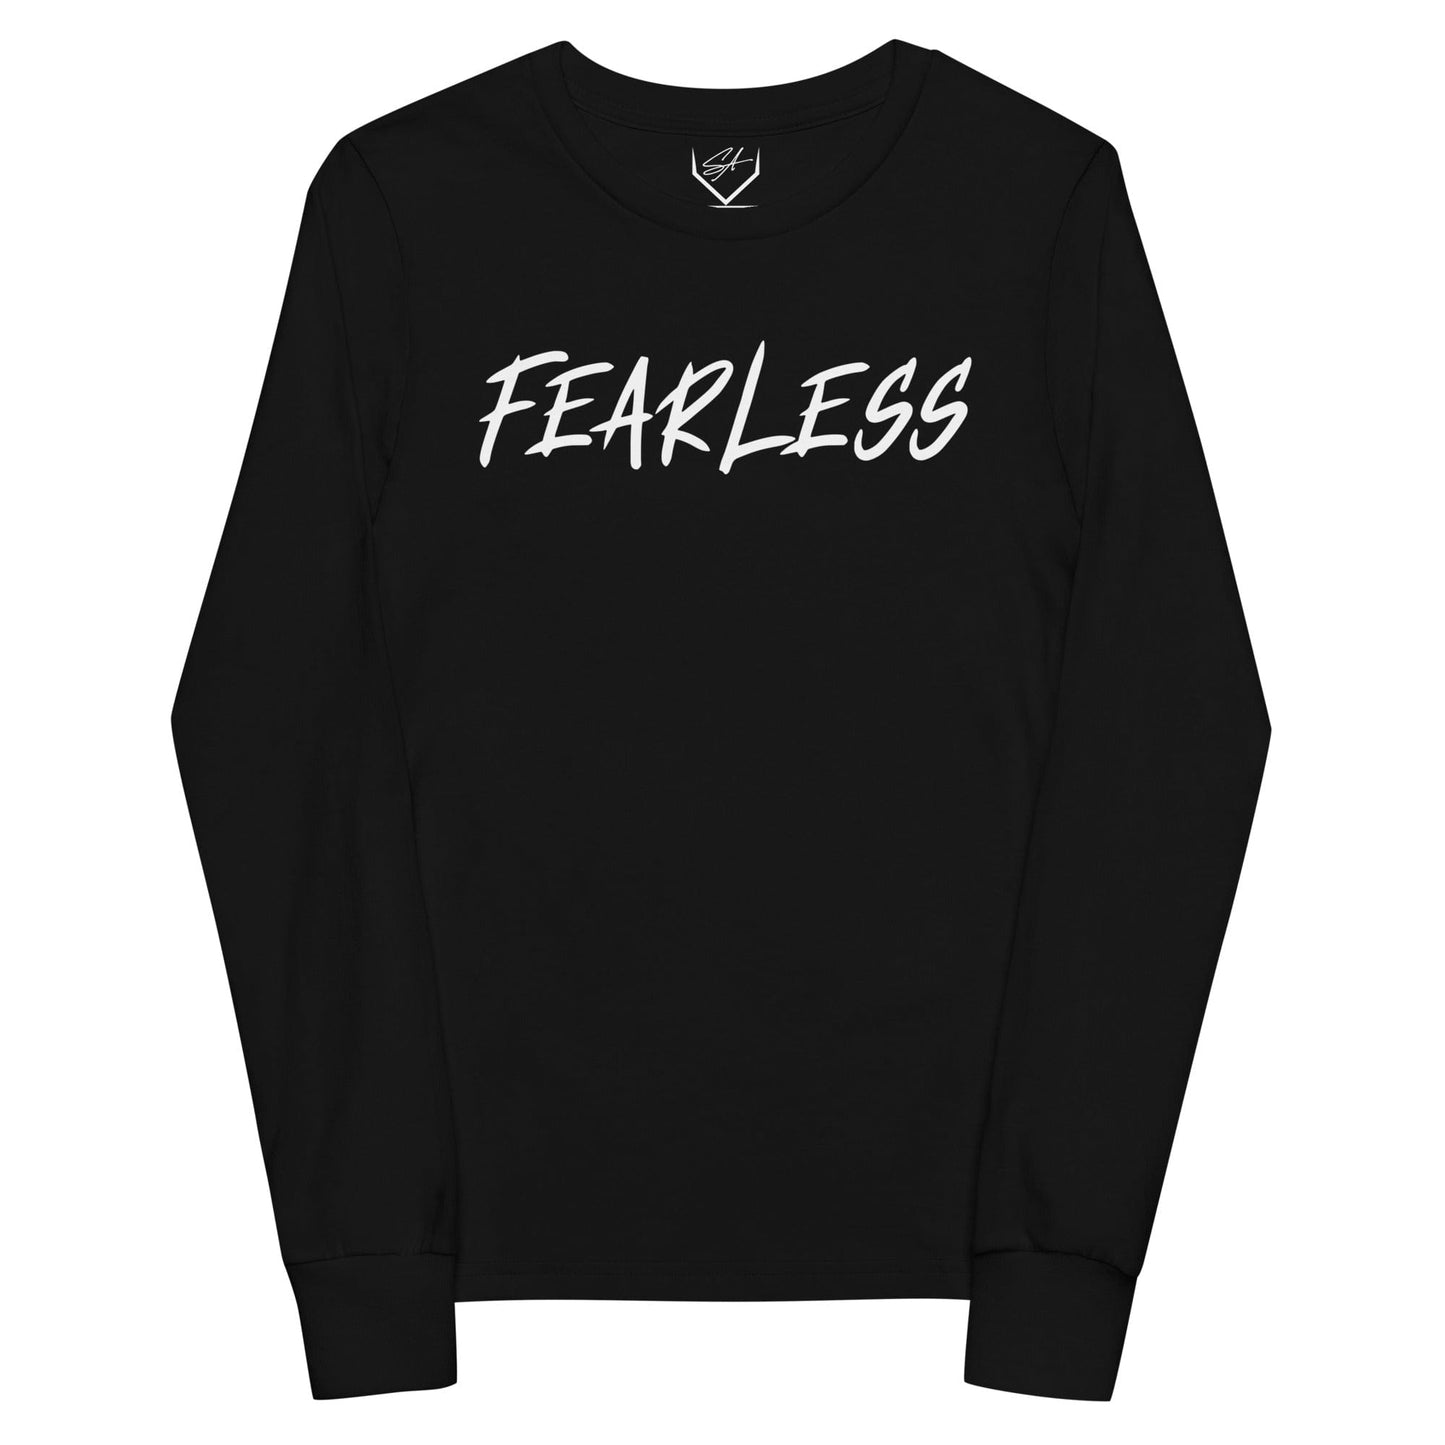 Fearless - Youth Long Sleeve